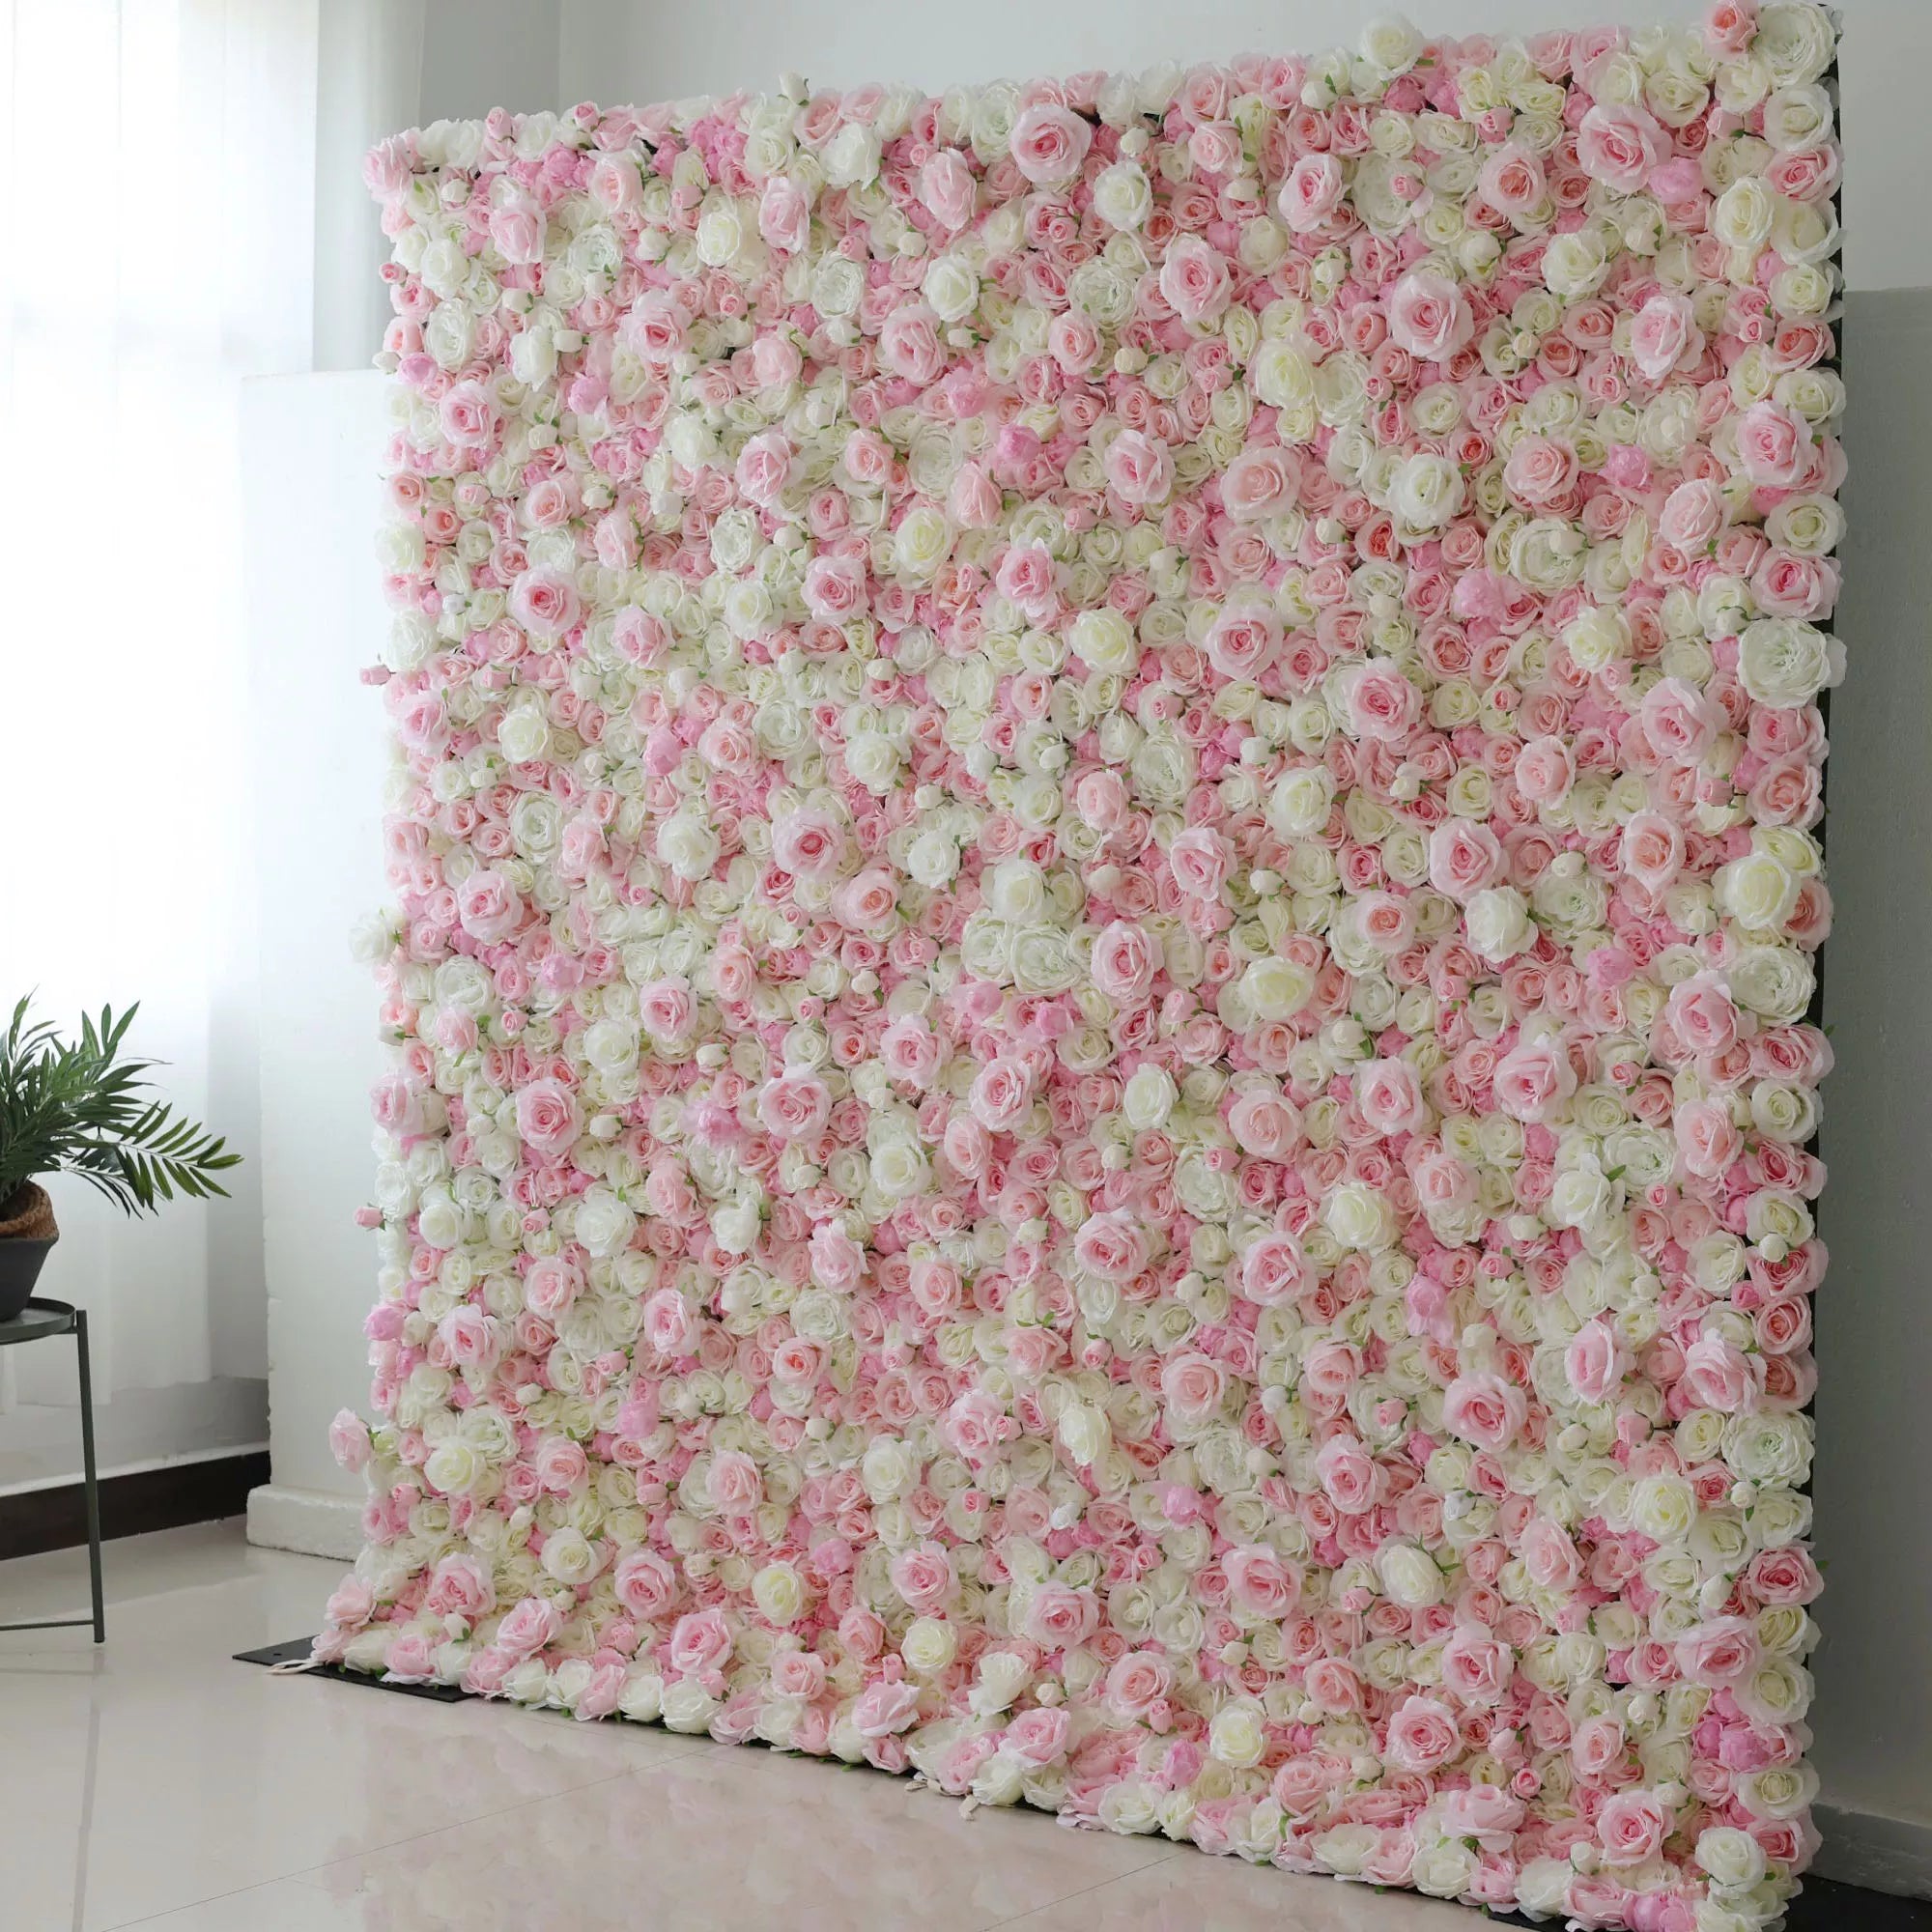 Valar Flowers Roll Up Fabric Artificial Mix Cavern Pink and Lemon White Flower Wall Wedding Backdrop, Floral Party Decor, Event Photography-VF-085